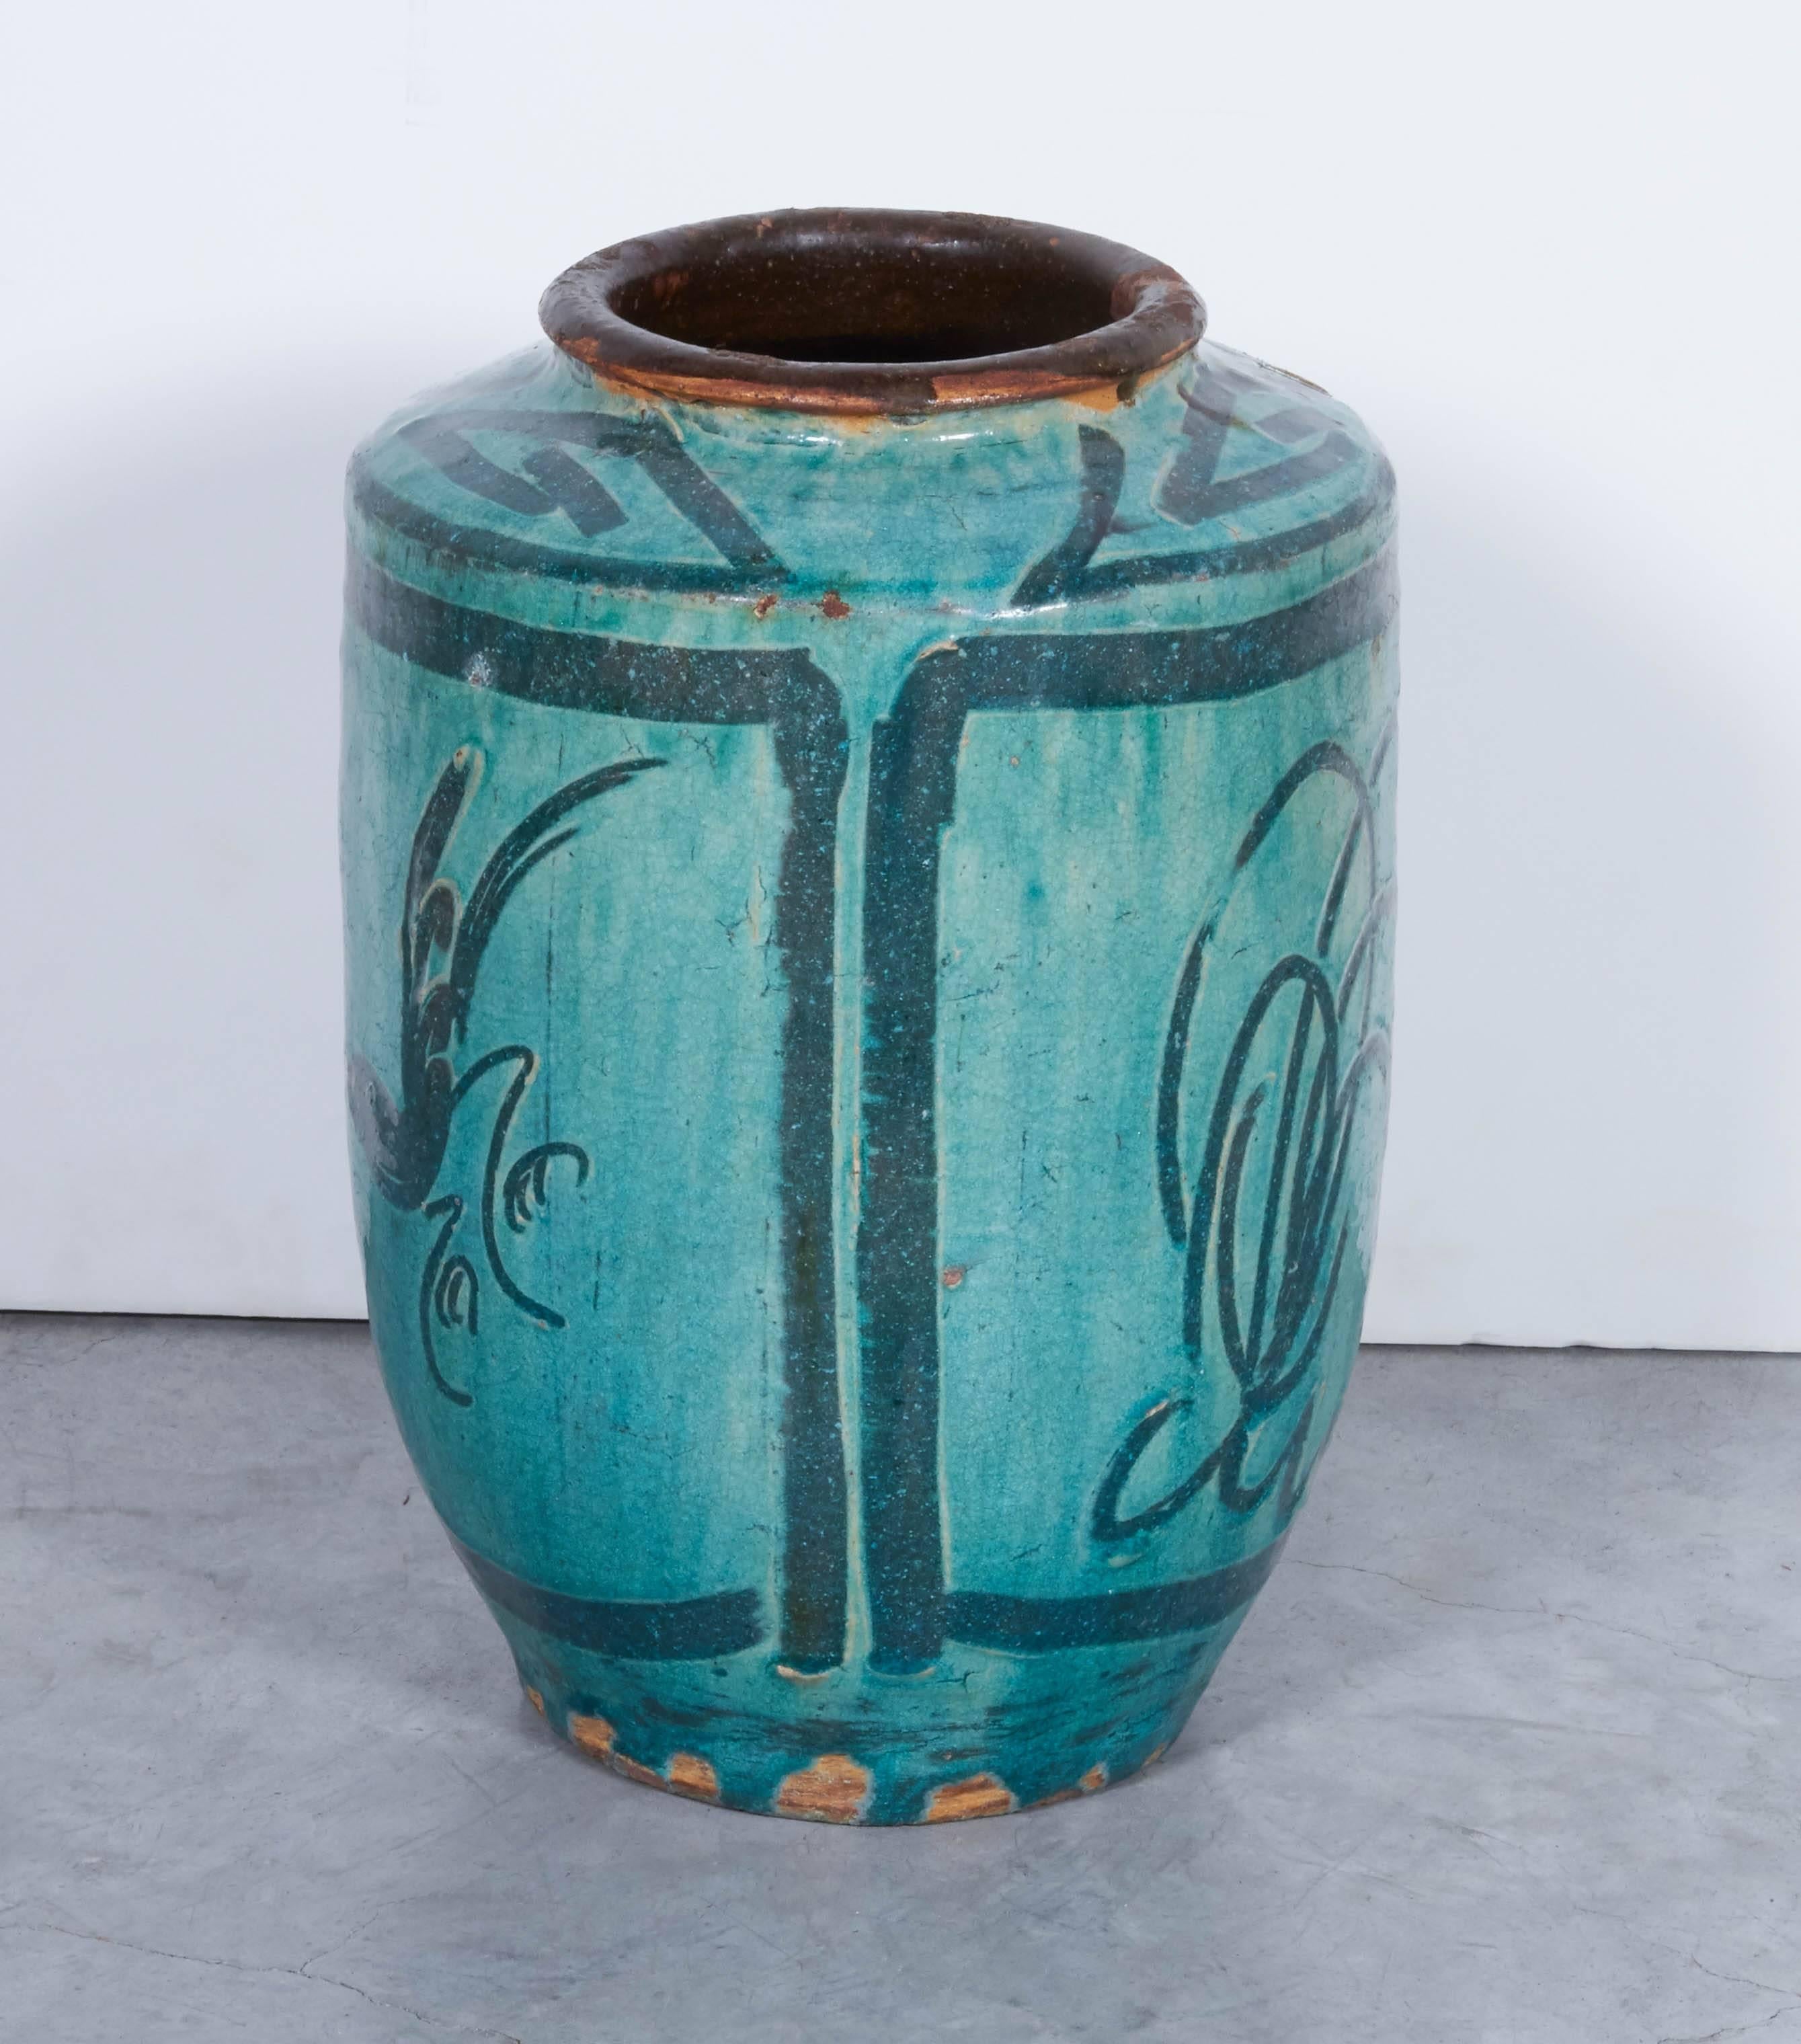 Antique Chinese ceramic food jar with beautiful hand-painted bird and flower imagery and striking blue or green glaze. From Hunan Province, circa 1850.
CR704.
a b h a y a 